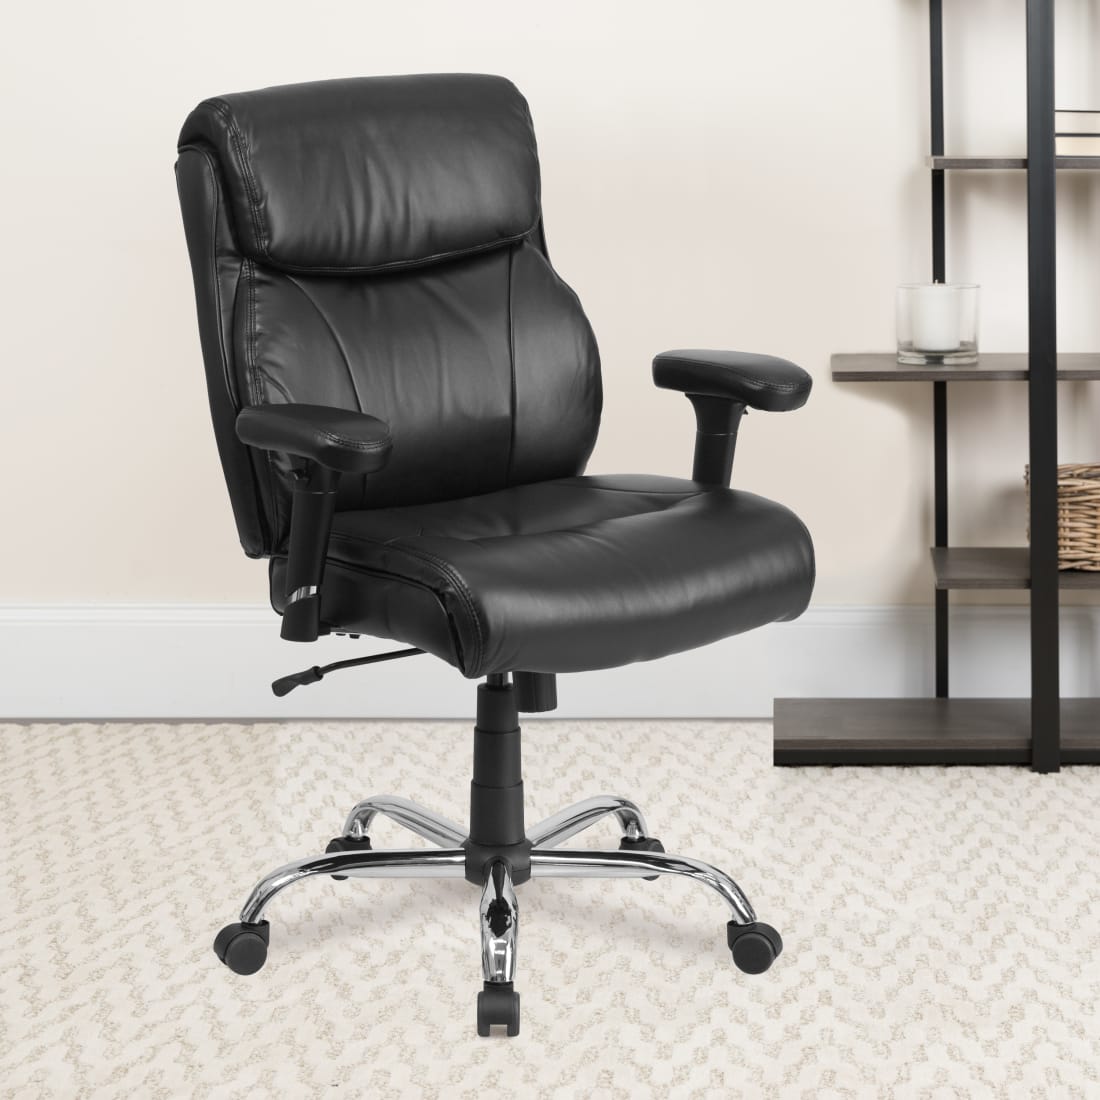 HERCULES Series Big & Tall 400 lb. Rated Black LeatherSoft Ergonomic Task Office Chair with Clean Line Stitching and Arms - GO2031LEAGG